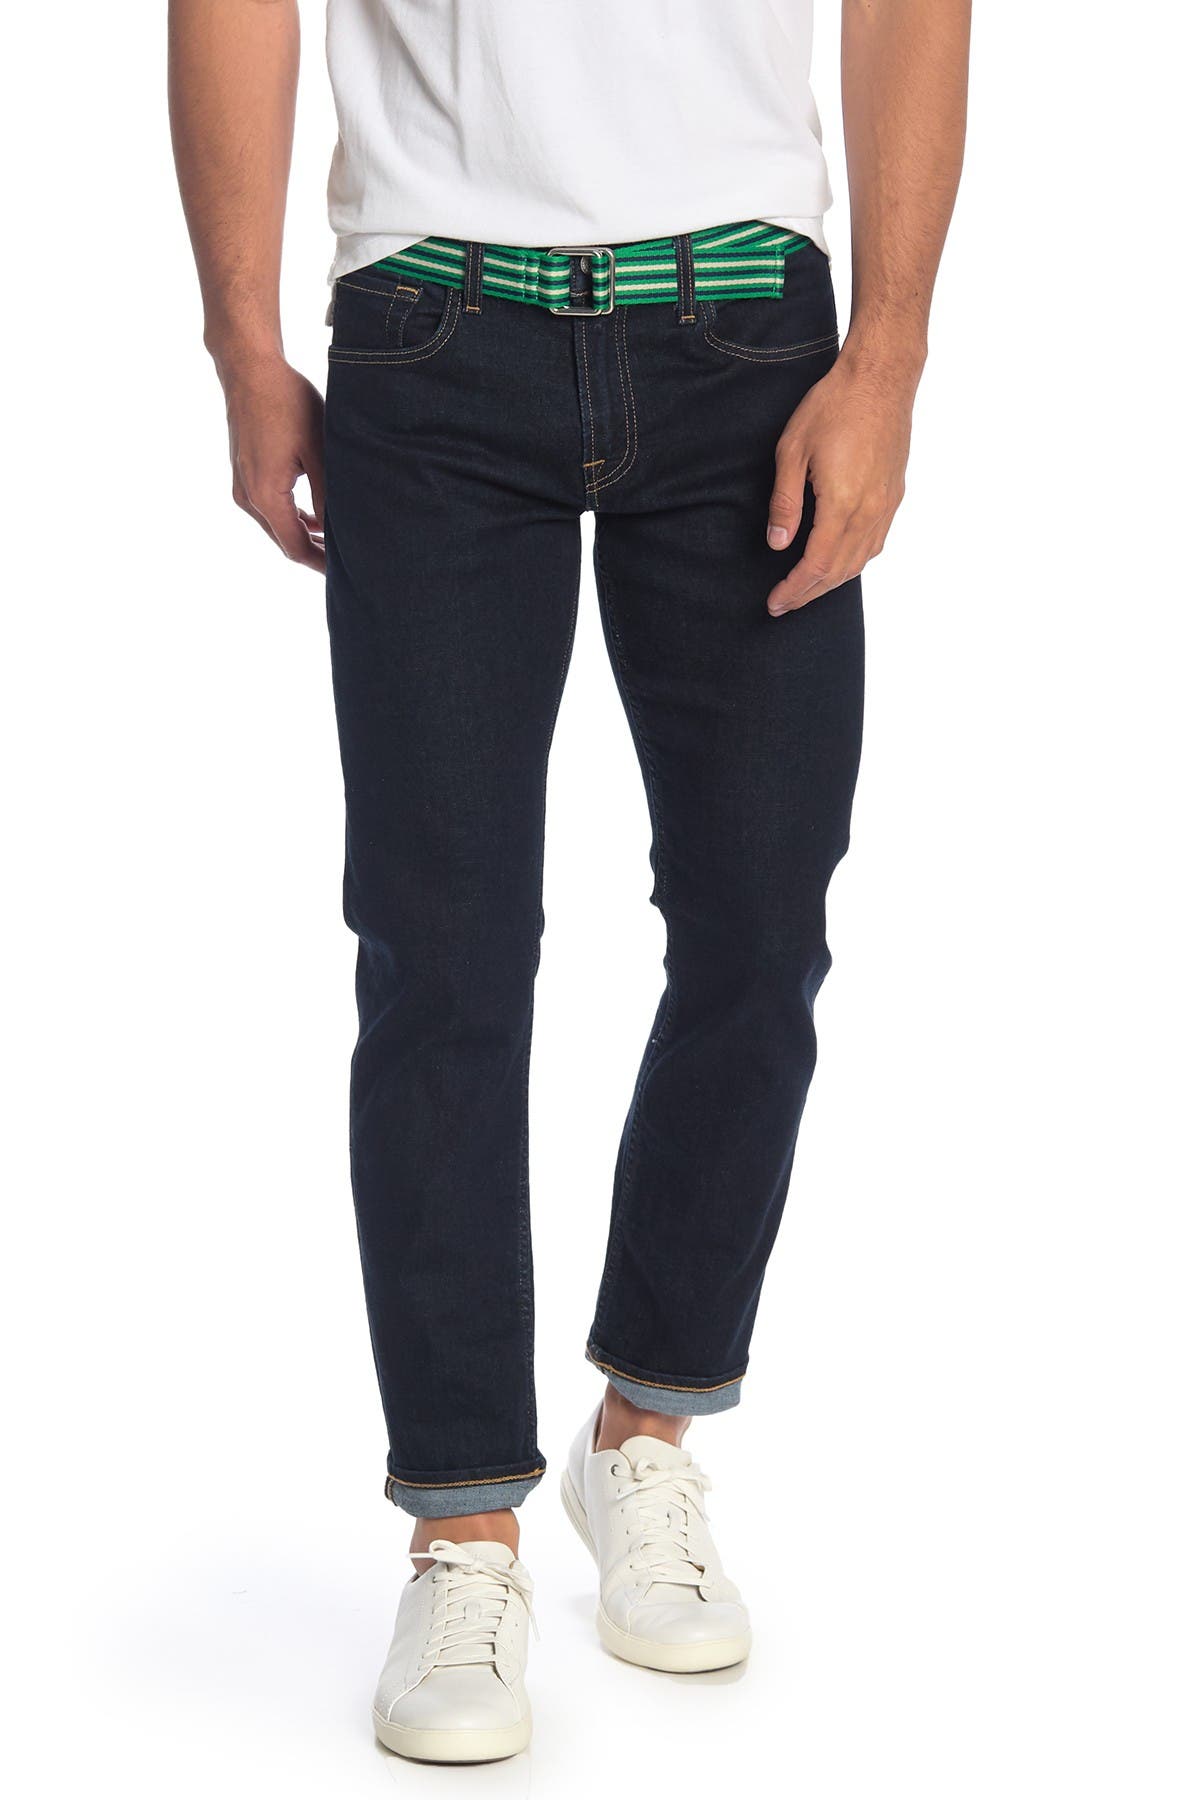 7 For All Mankind Slimmy Slim Jeans In Bright Blue3